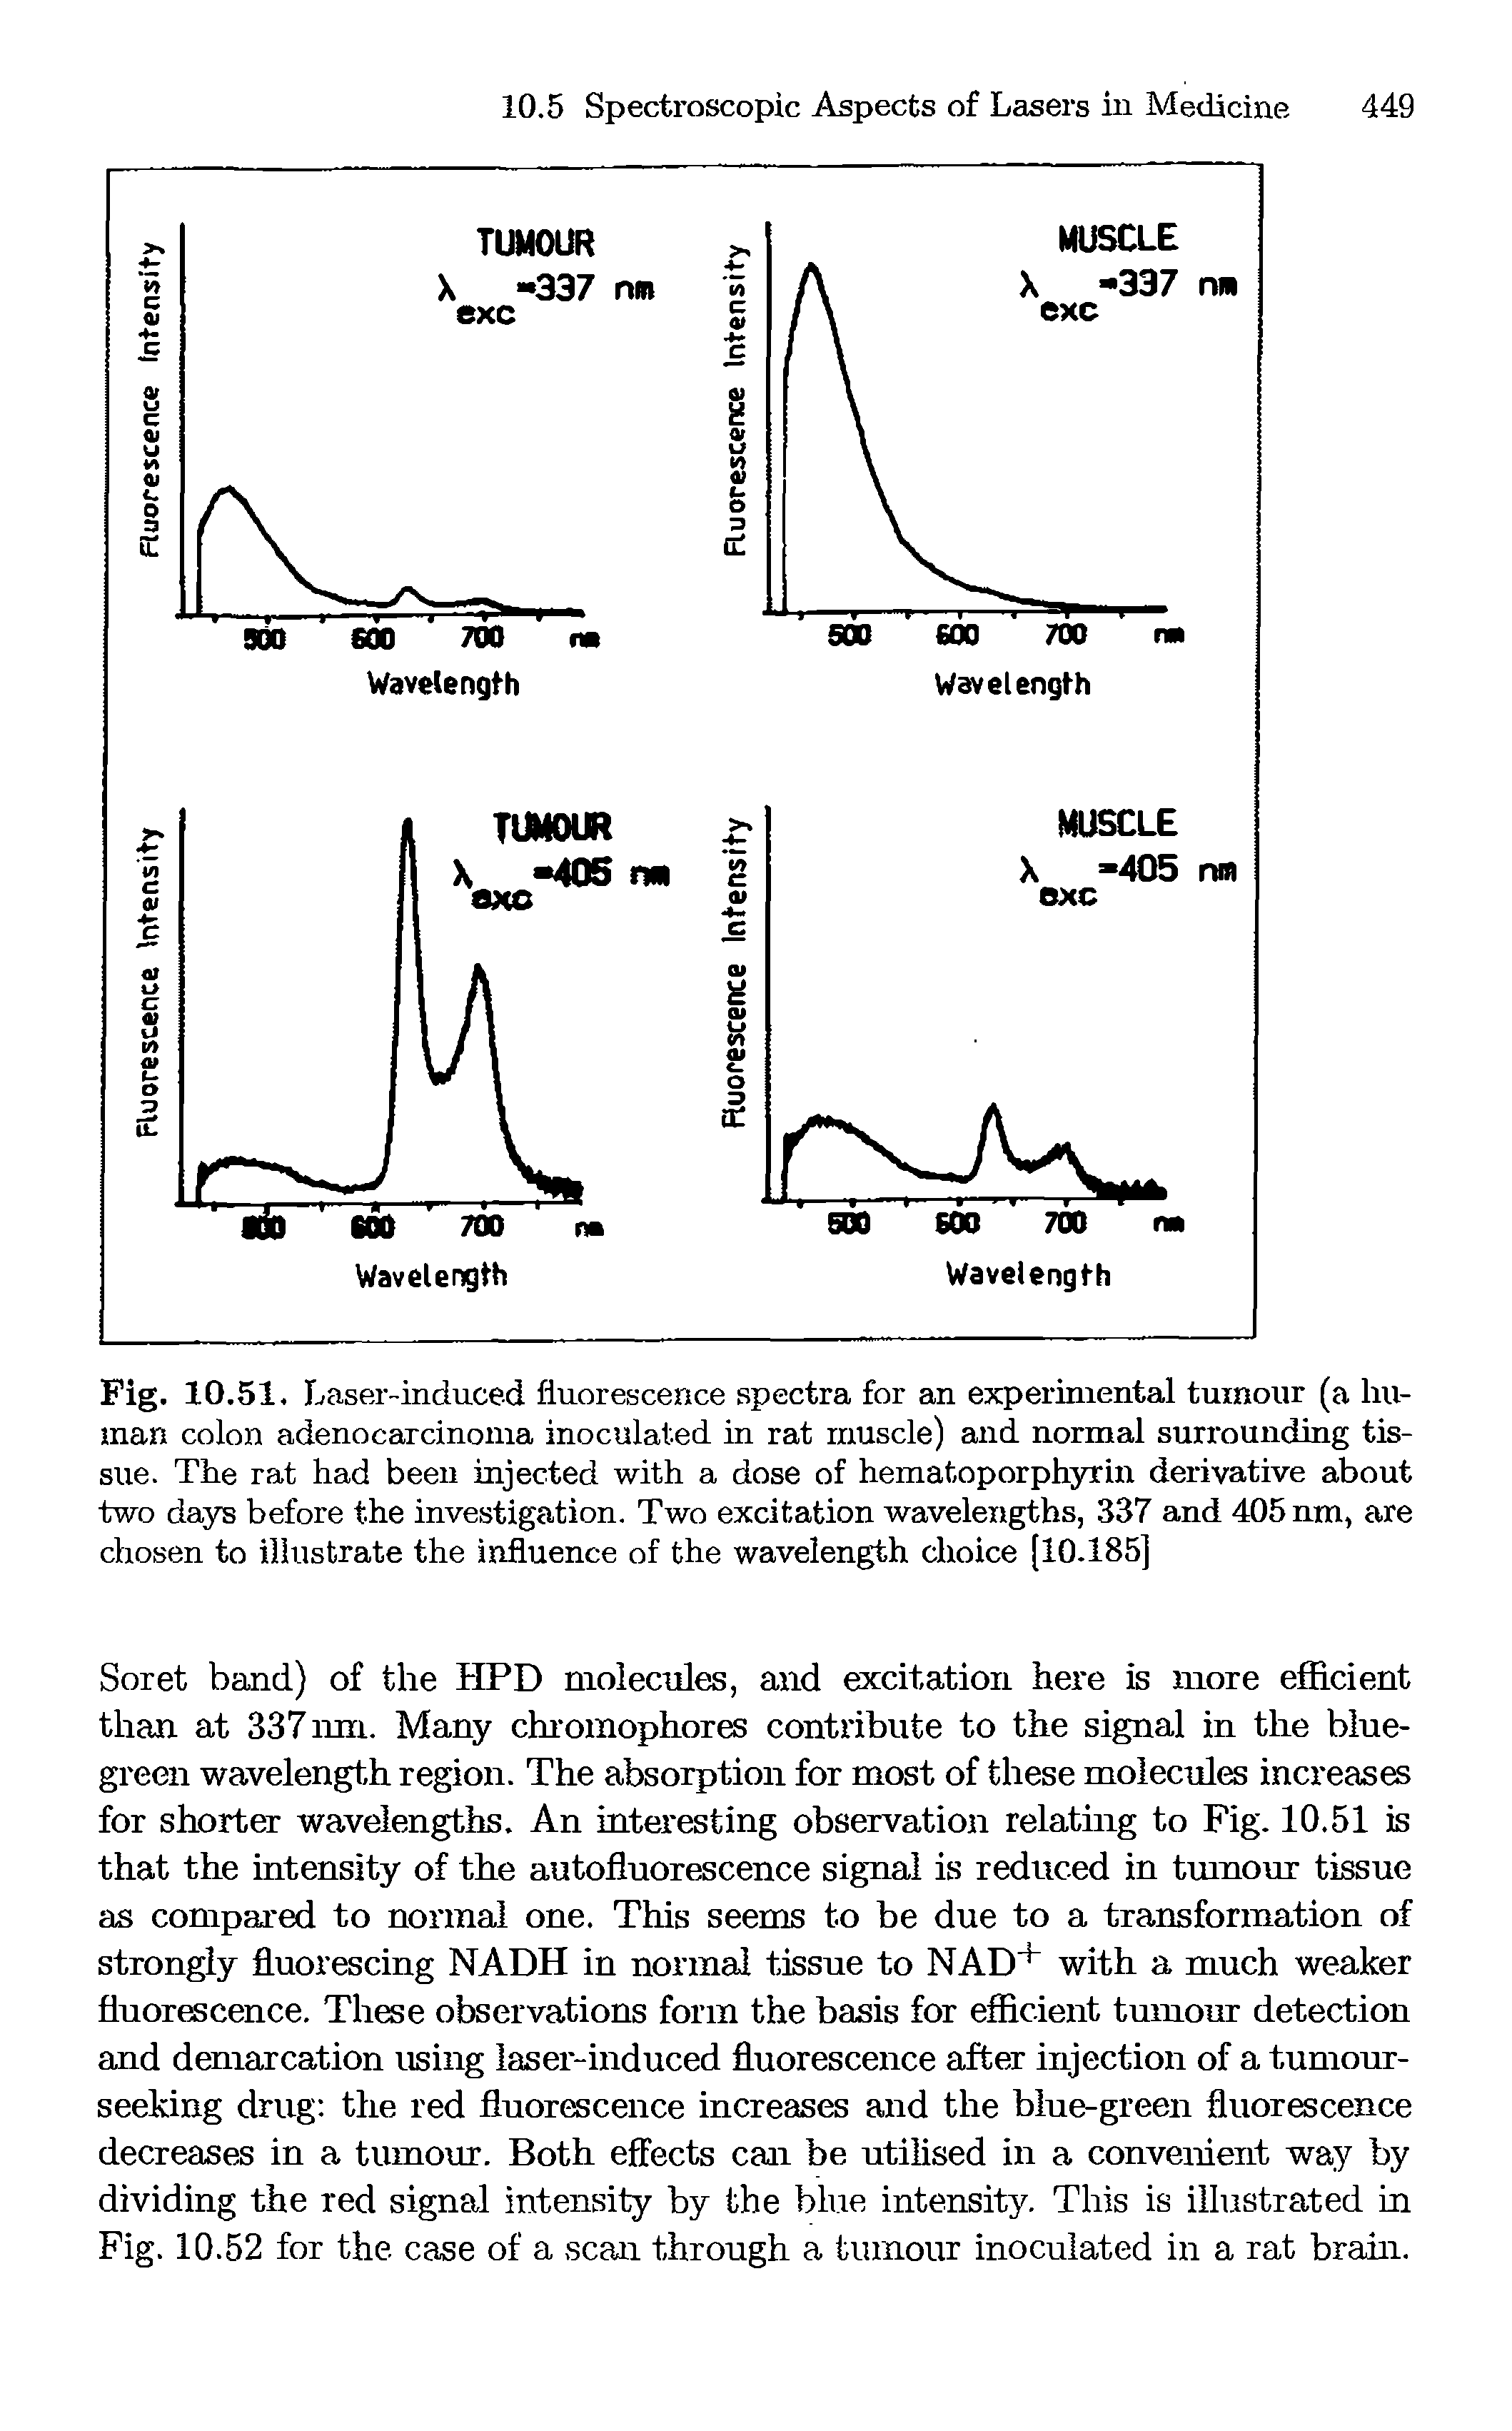 Fig. 10.51. Laser-induced fluorescence spectra for an experimental tumour (a human colon adenocarcinoma inoculated in rat muscle) and normal surrounding tissue. The rat had been injected with a dose of hematoporphyrin derivative about two days before the investigation. Two excitation wavelengths, 337 and 405 nm, are chosen to illustrate the influence of the wavelength choice [10.185]...